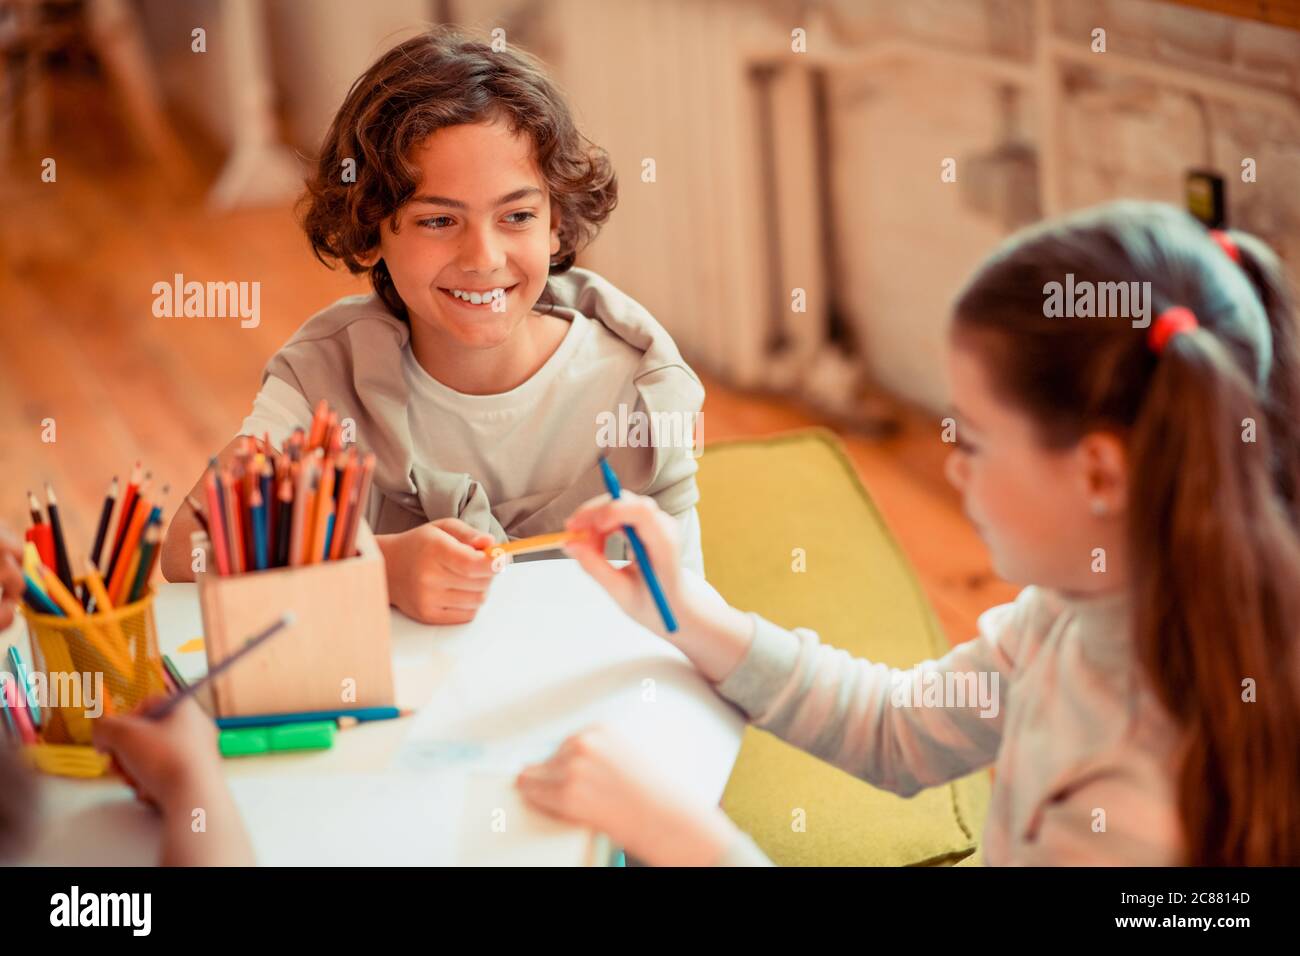 Boy sharing a color pencil with a girl Stock Photo